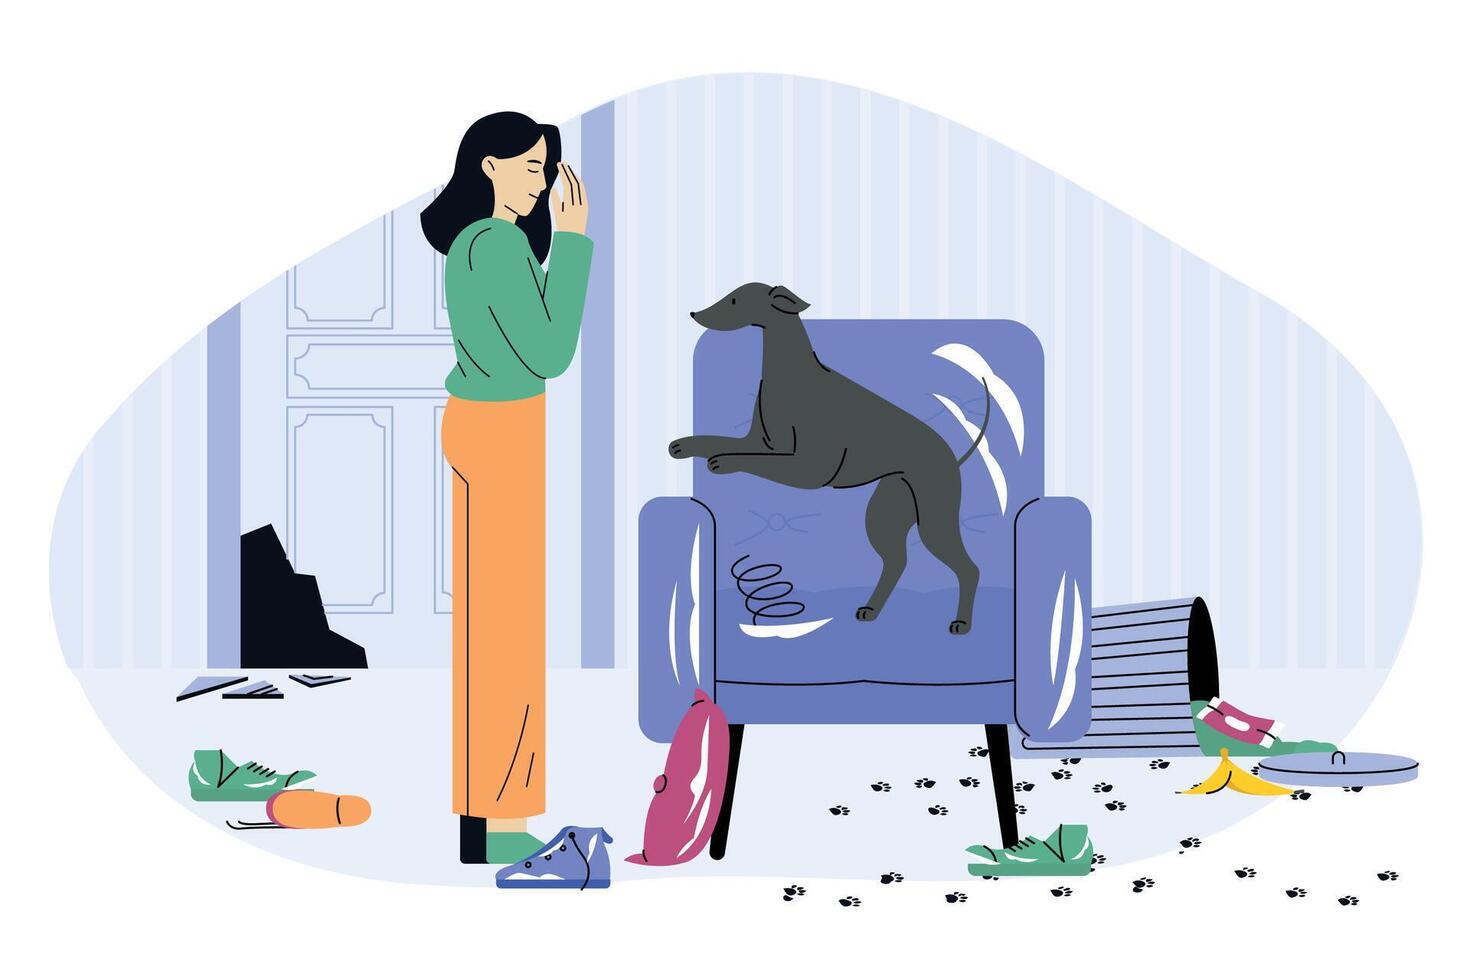 Dog behavior problem. Cartoon naughty puppy destroy house, pet indoor mess and chaos, naughty animal character playing and destroying furniture. Vector illustration